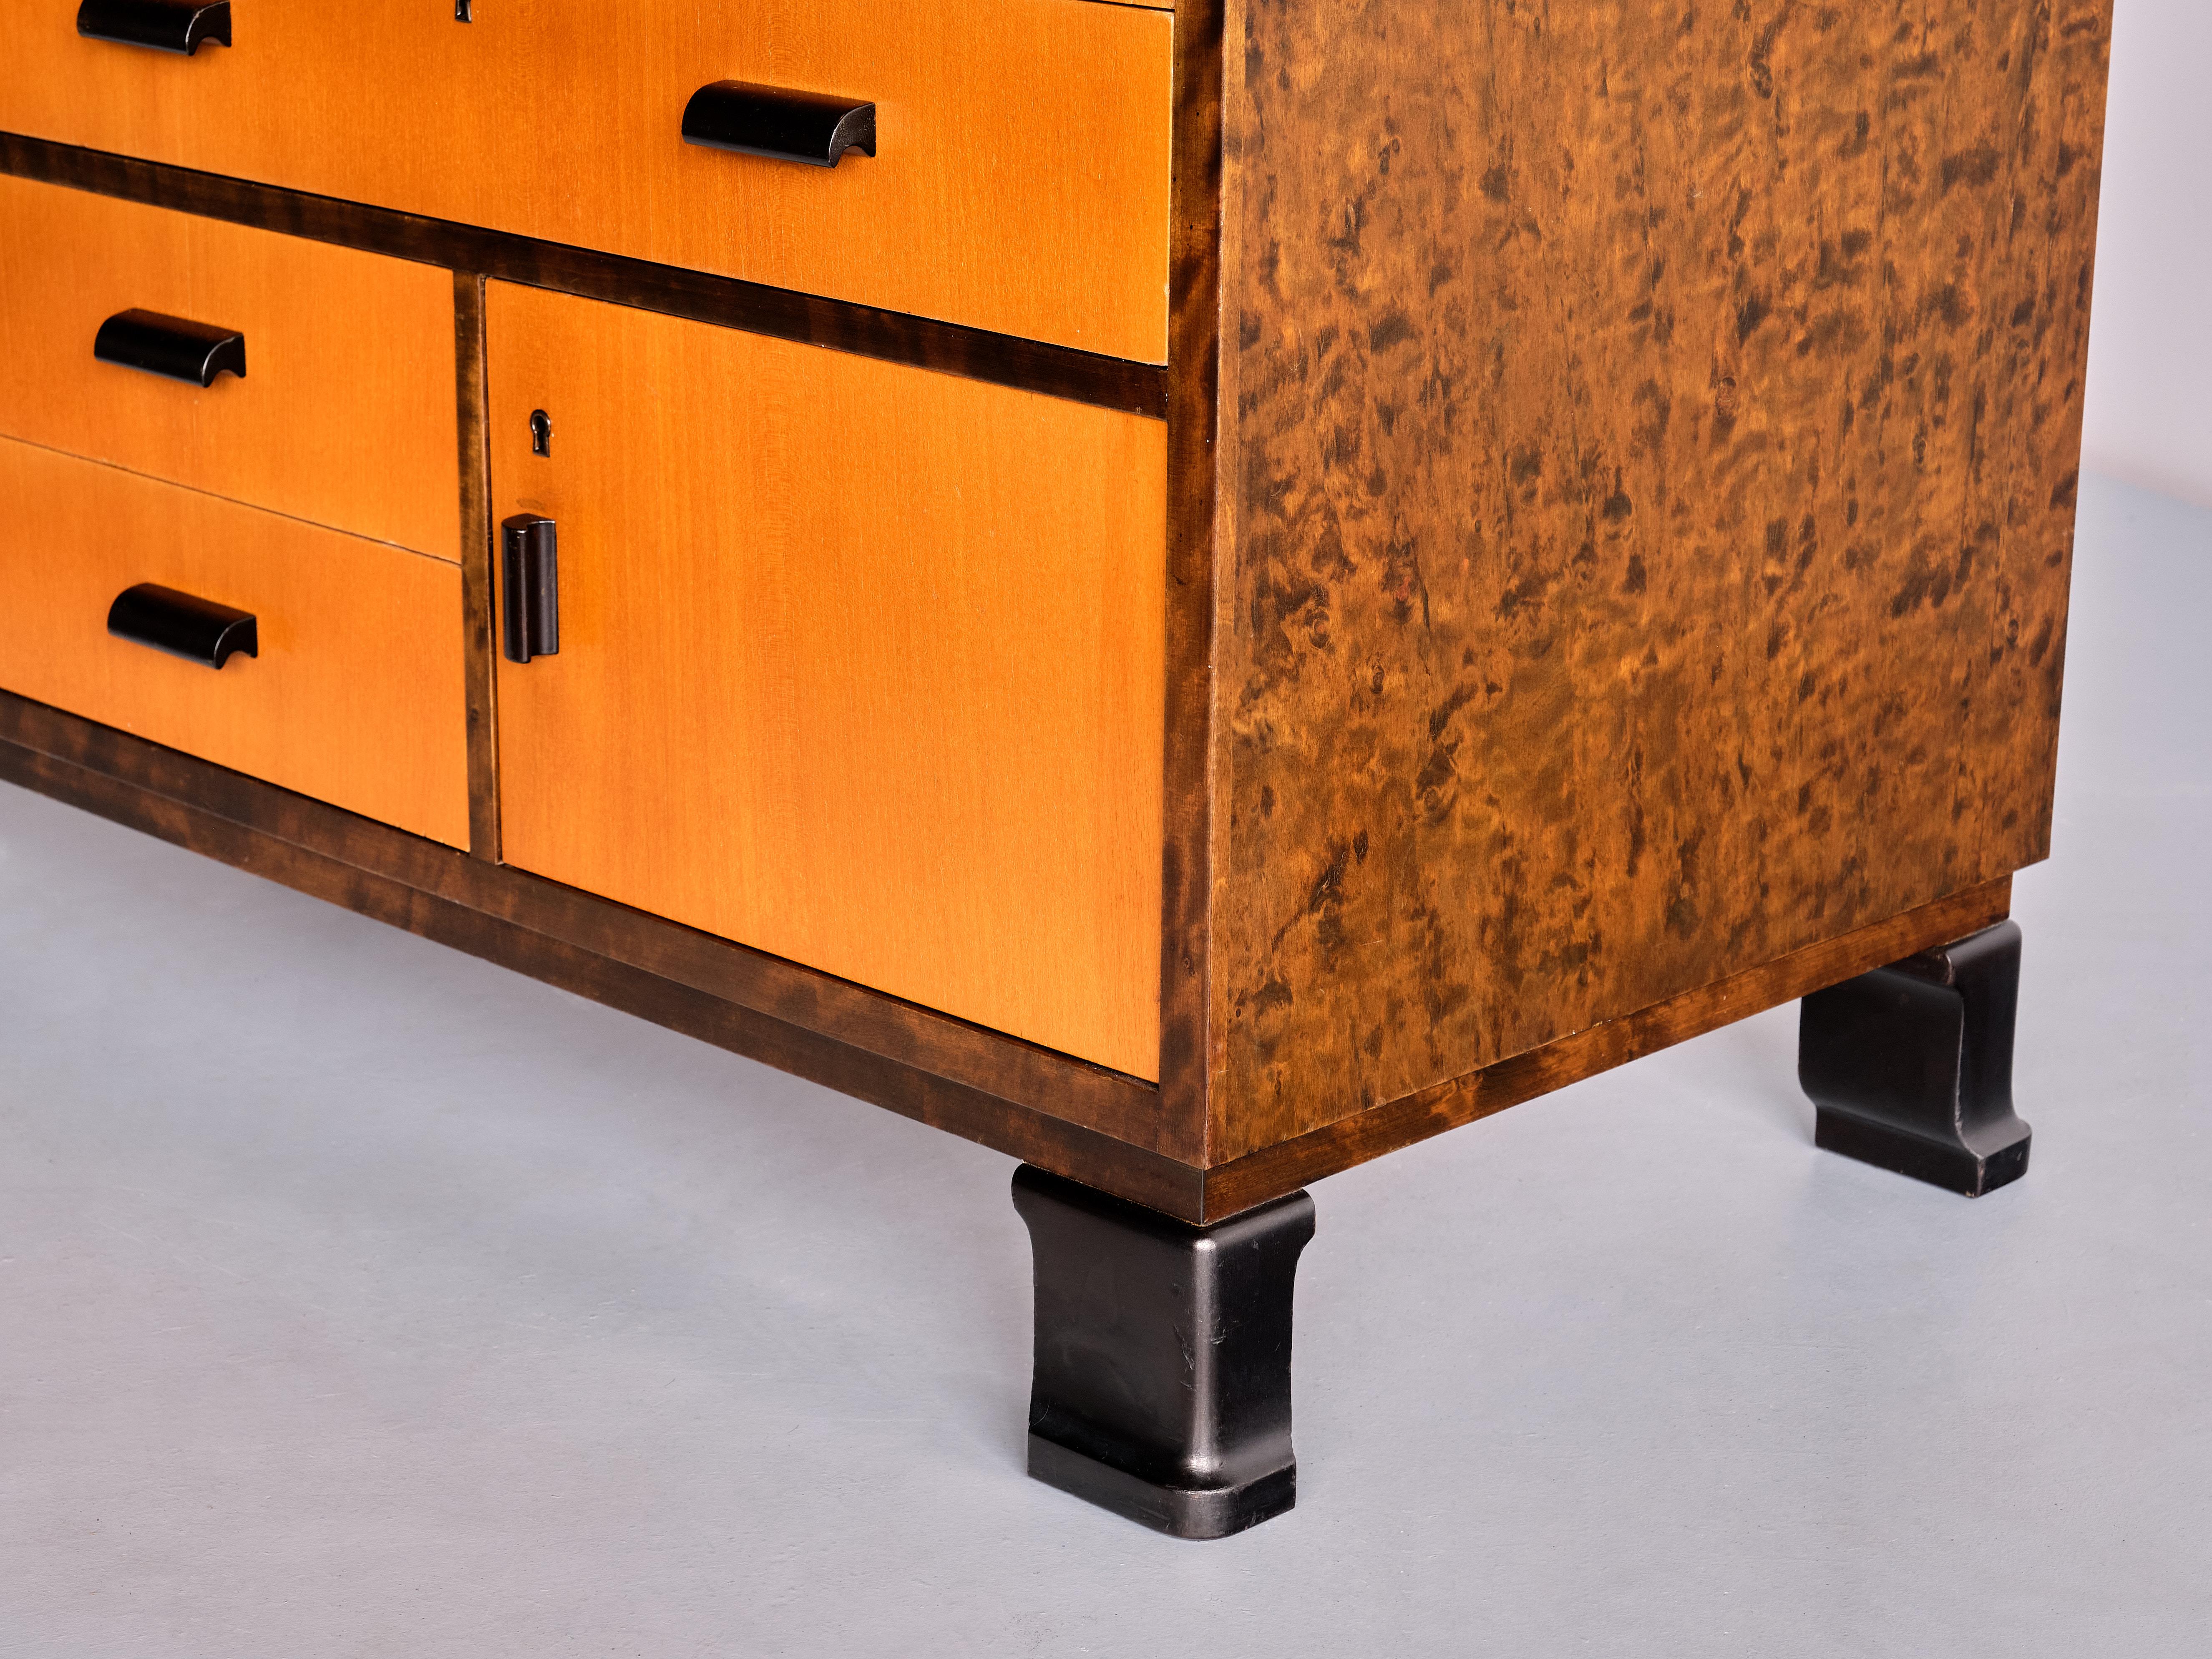 Pair of Axel Larsson Sideboards in Elm and Birch, SMF Bodafors, Sweden, 1940s For Sale 7